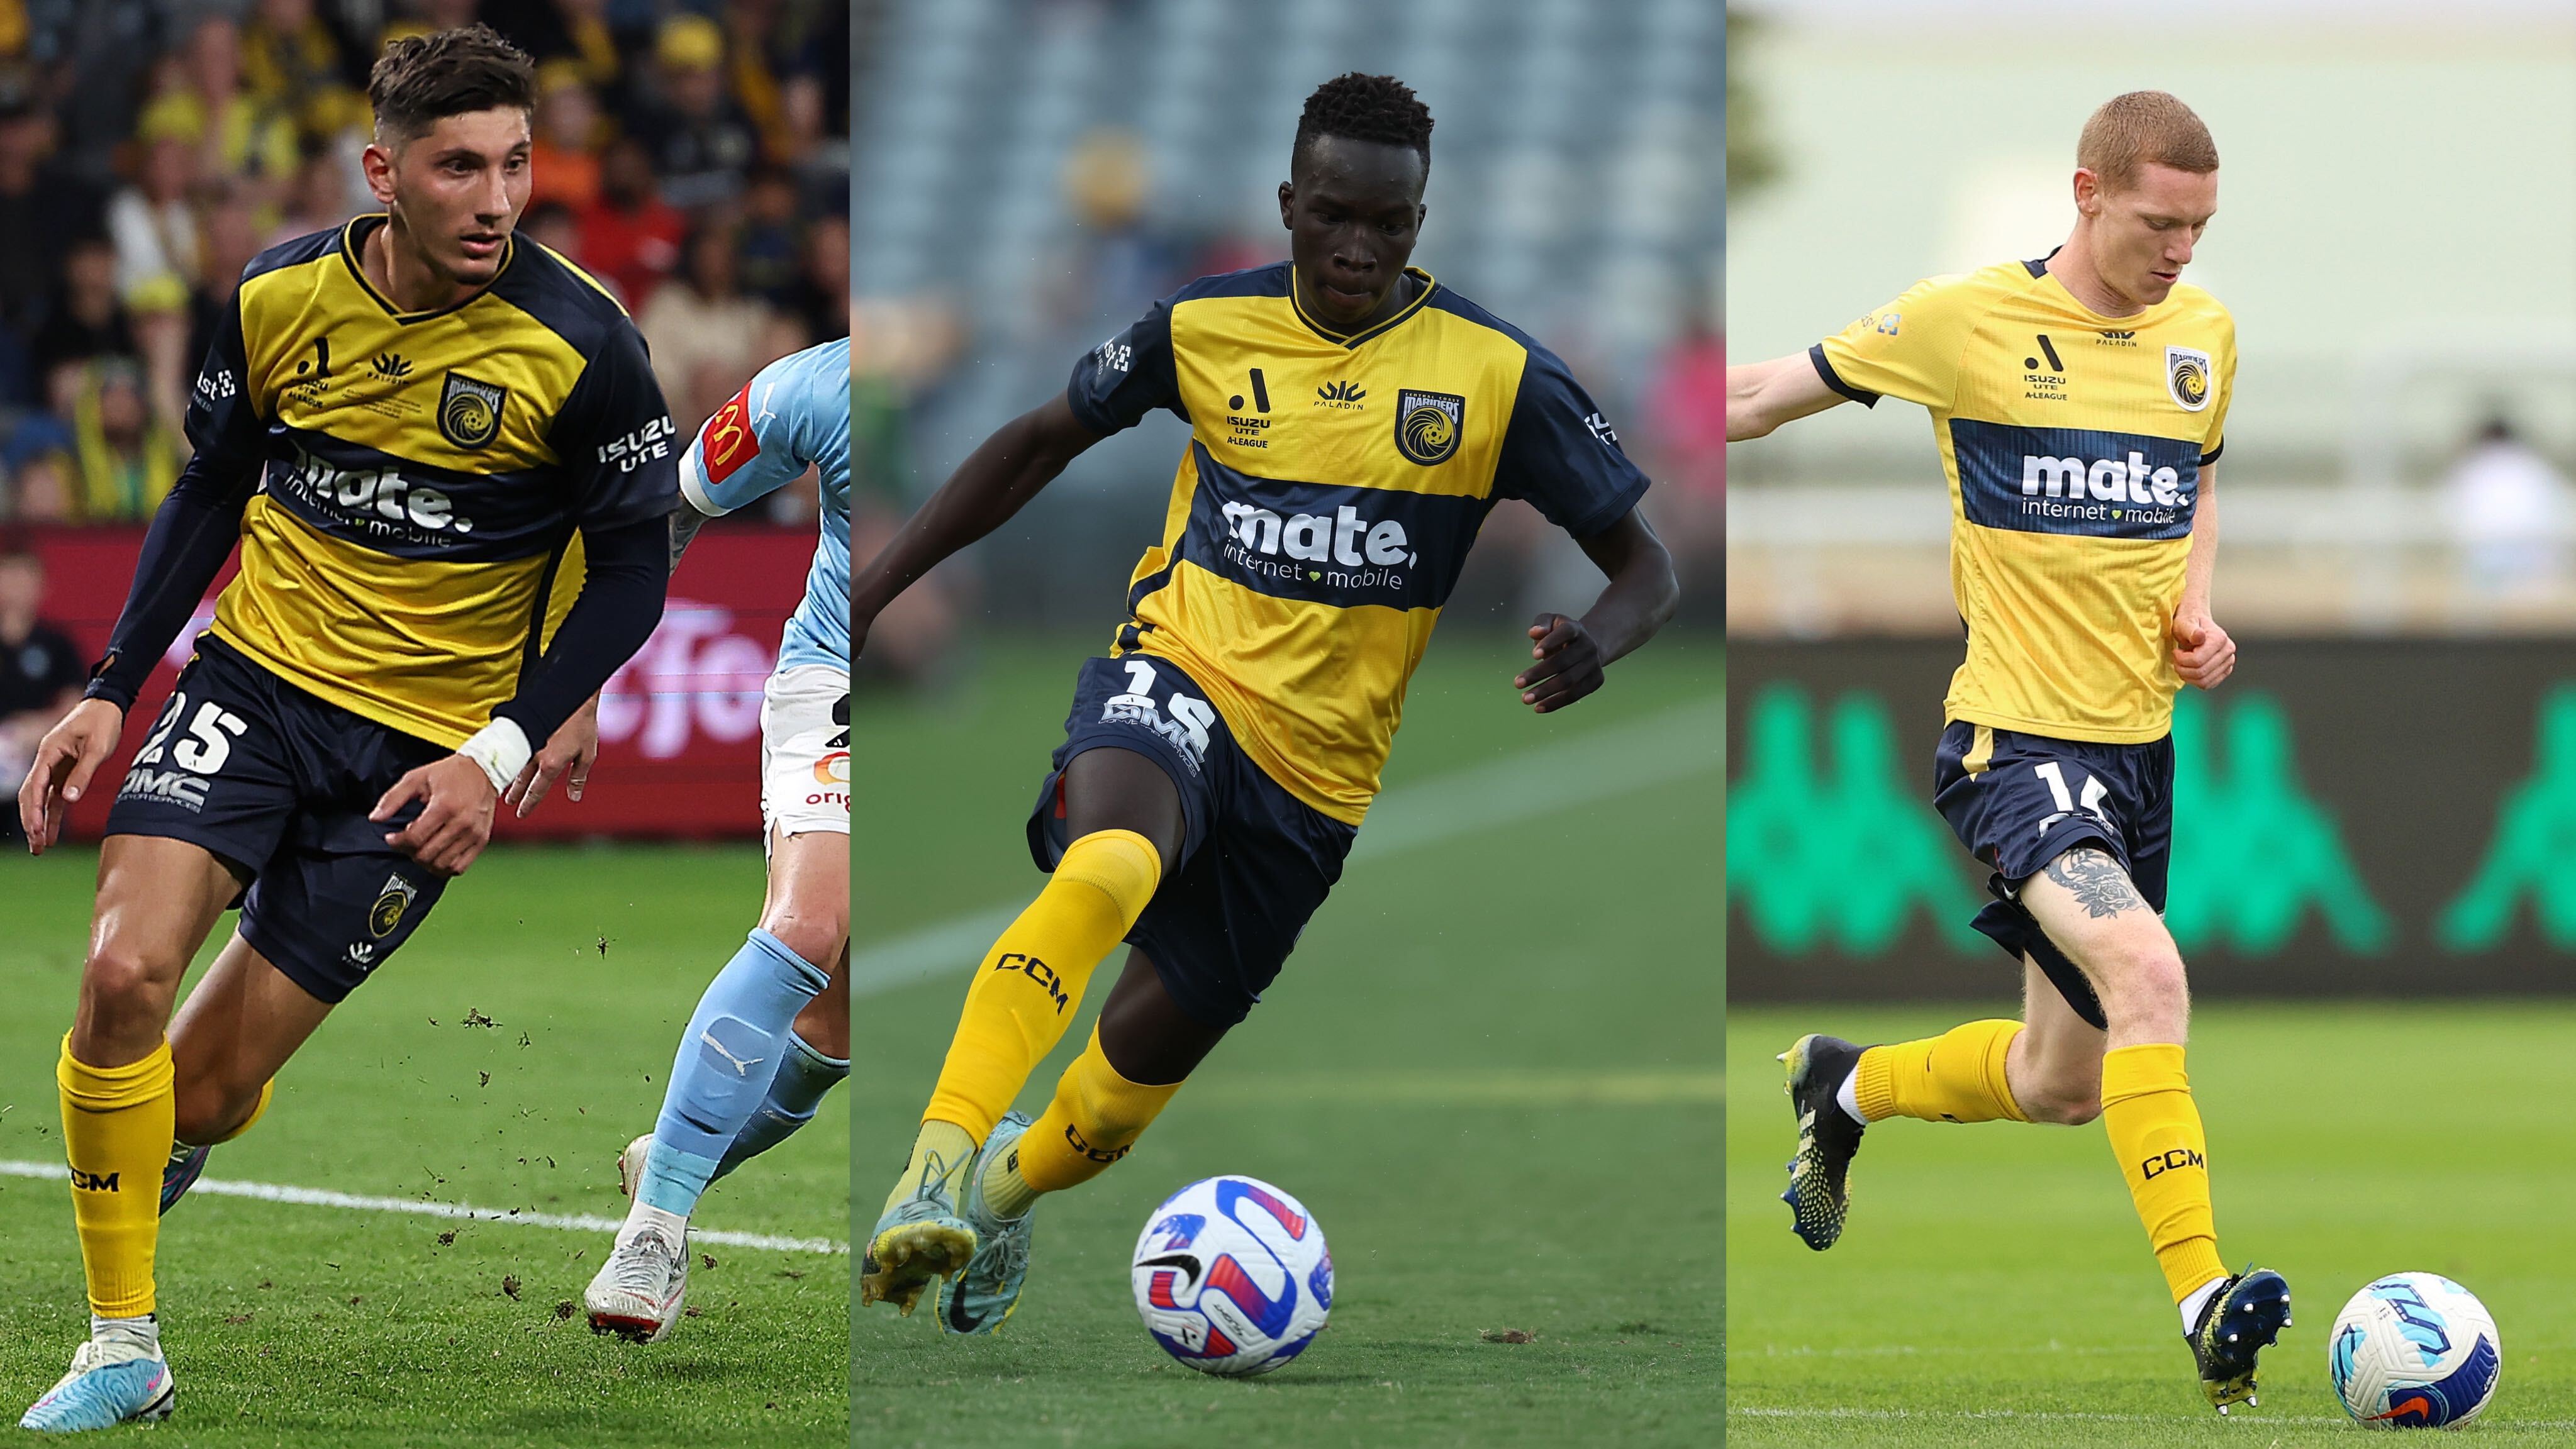 Take up to 50% off our 2021/22 - Central Coast Mariners